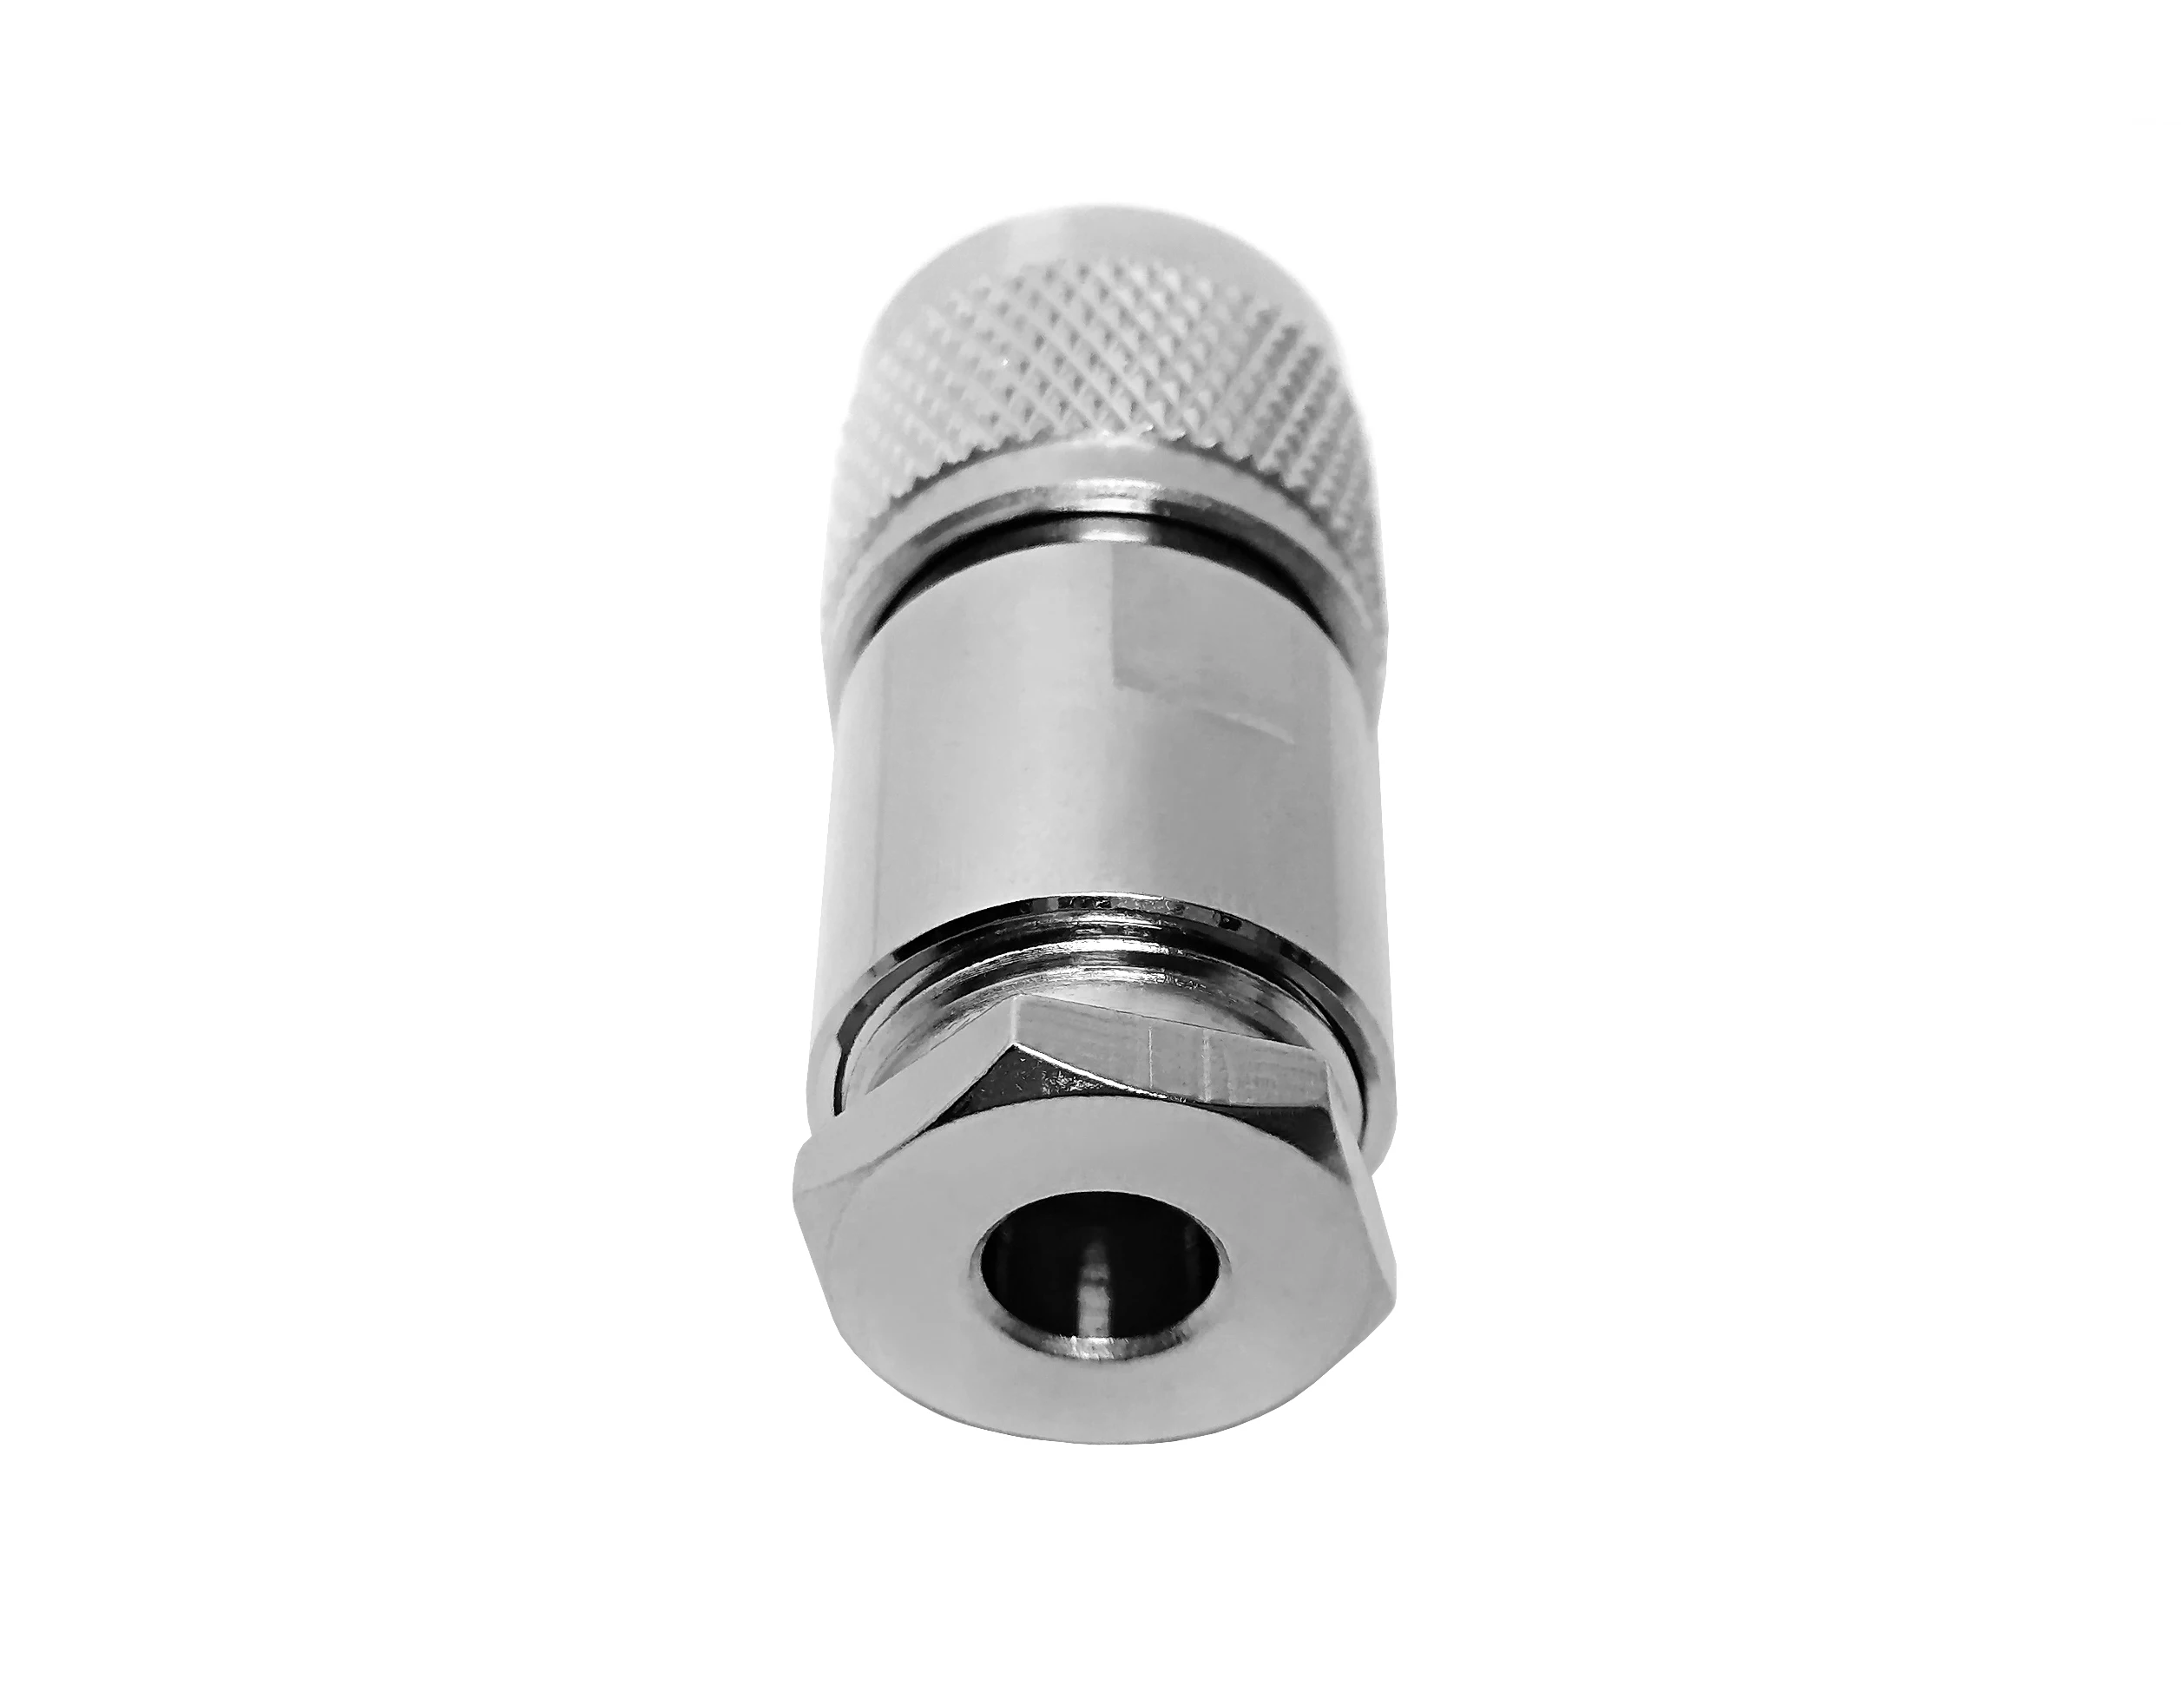 RFVOTON Rf  Connector N male straight  Clamp   for Coaxial Cable LMR400 manufacture